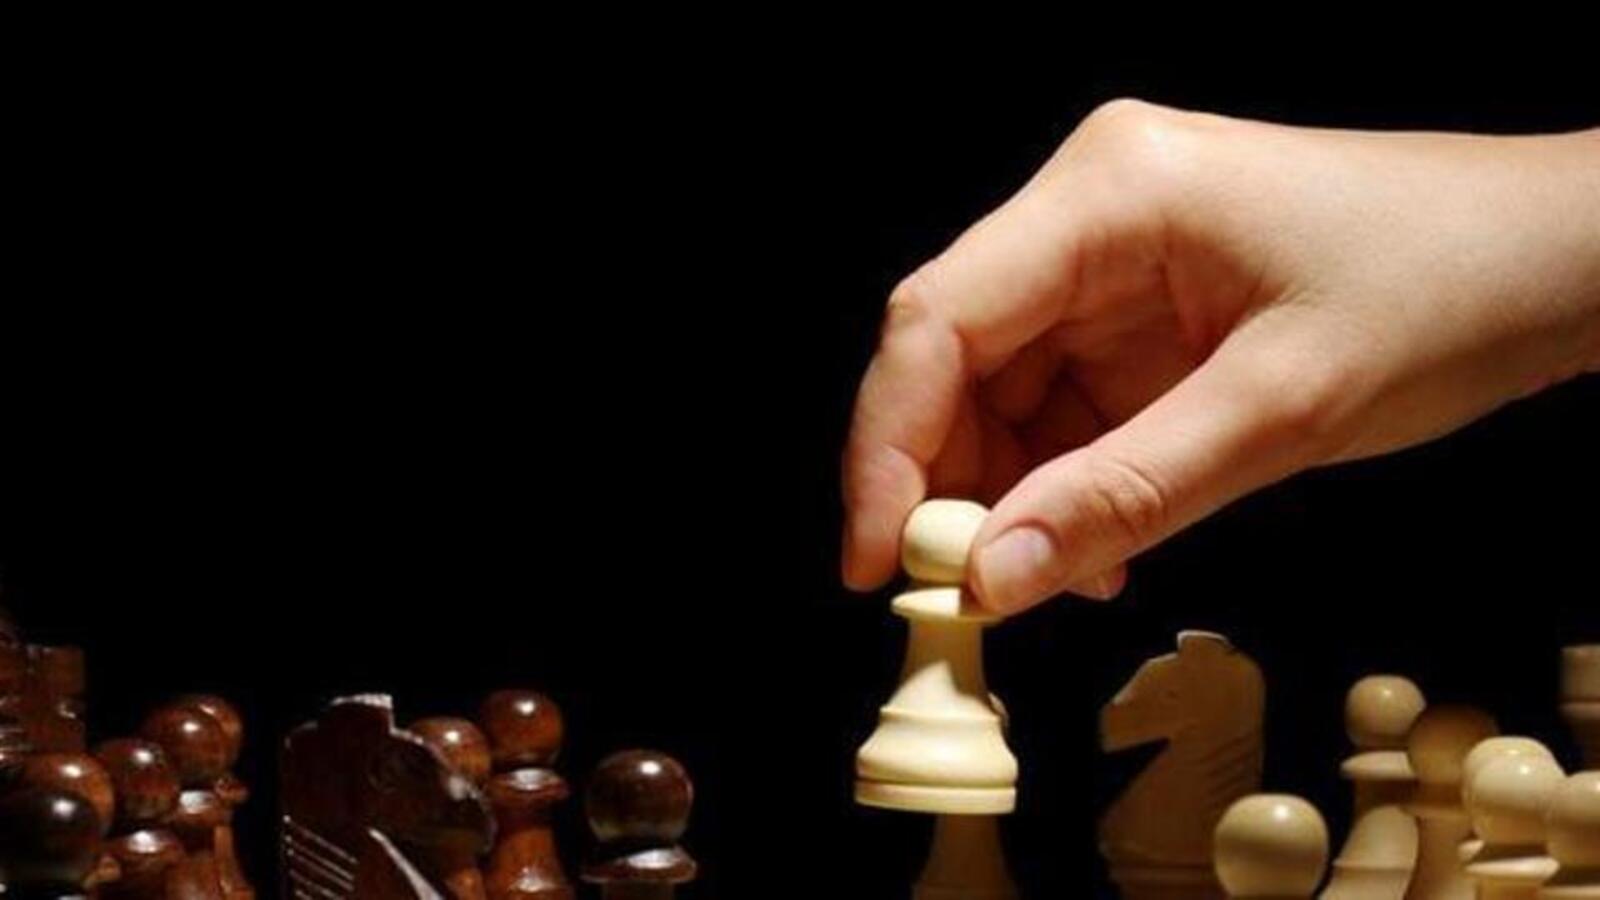 Chennai wins right to host 2022 Chess Olympiad